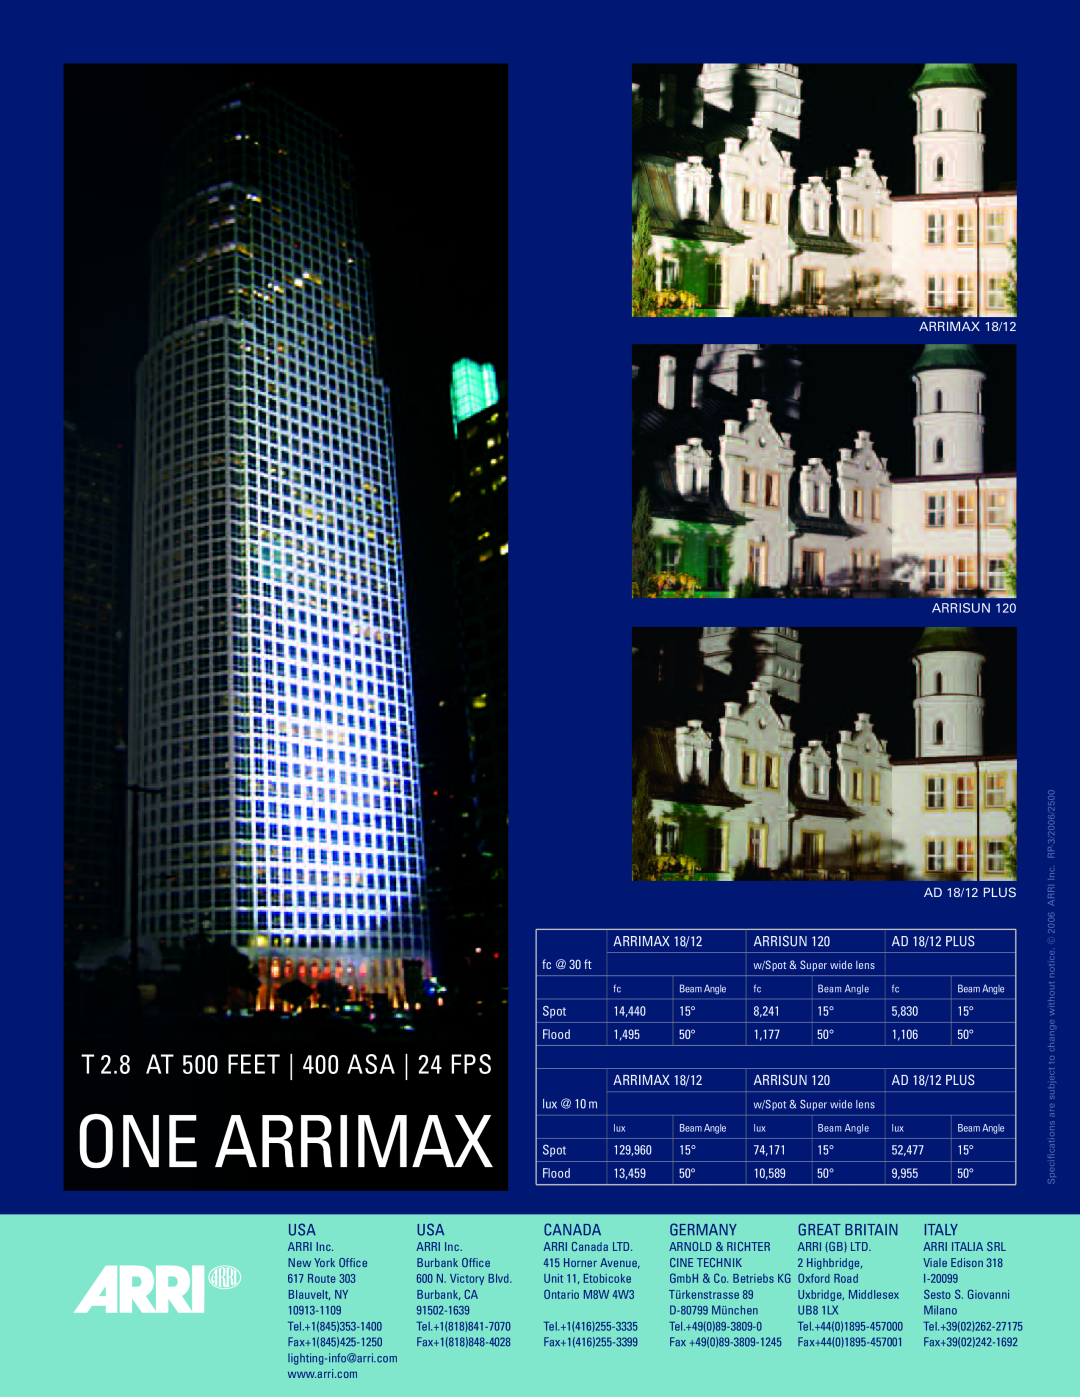 ARRI manual One Arrimax, T 2.8 AT 500 FEET 400 ASA 24 FPS, Canada, Germany, Great Britain, Italy, ARRIMAX 18/12, Arrisun 